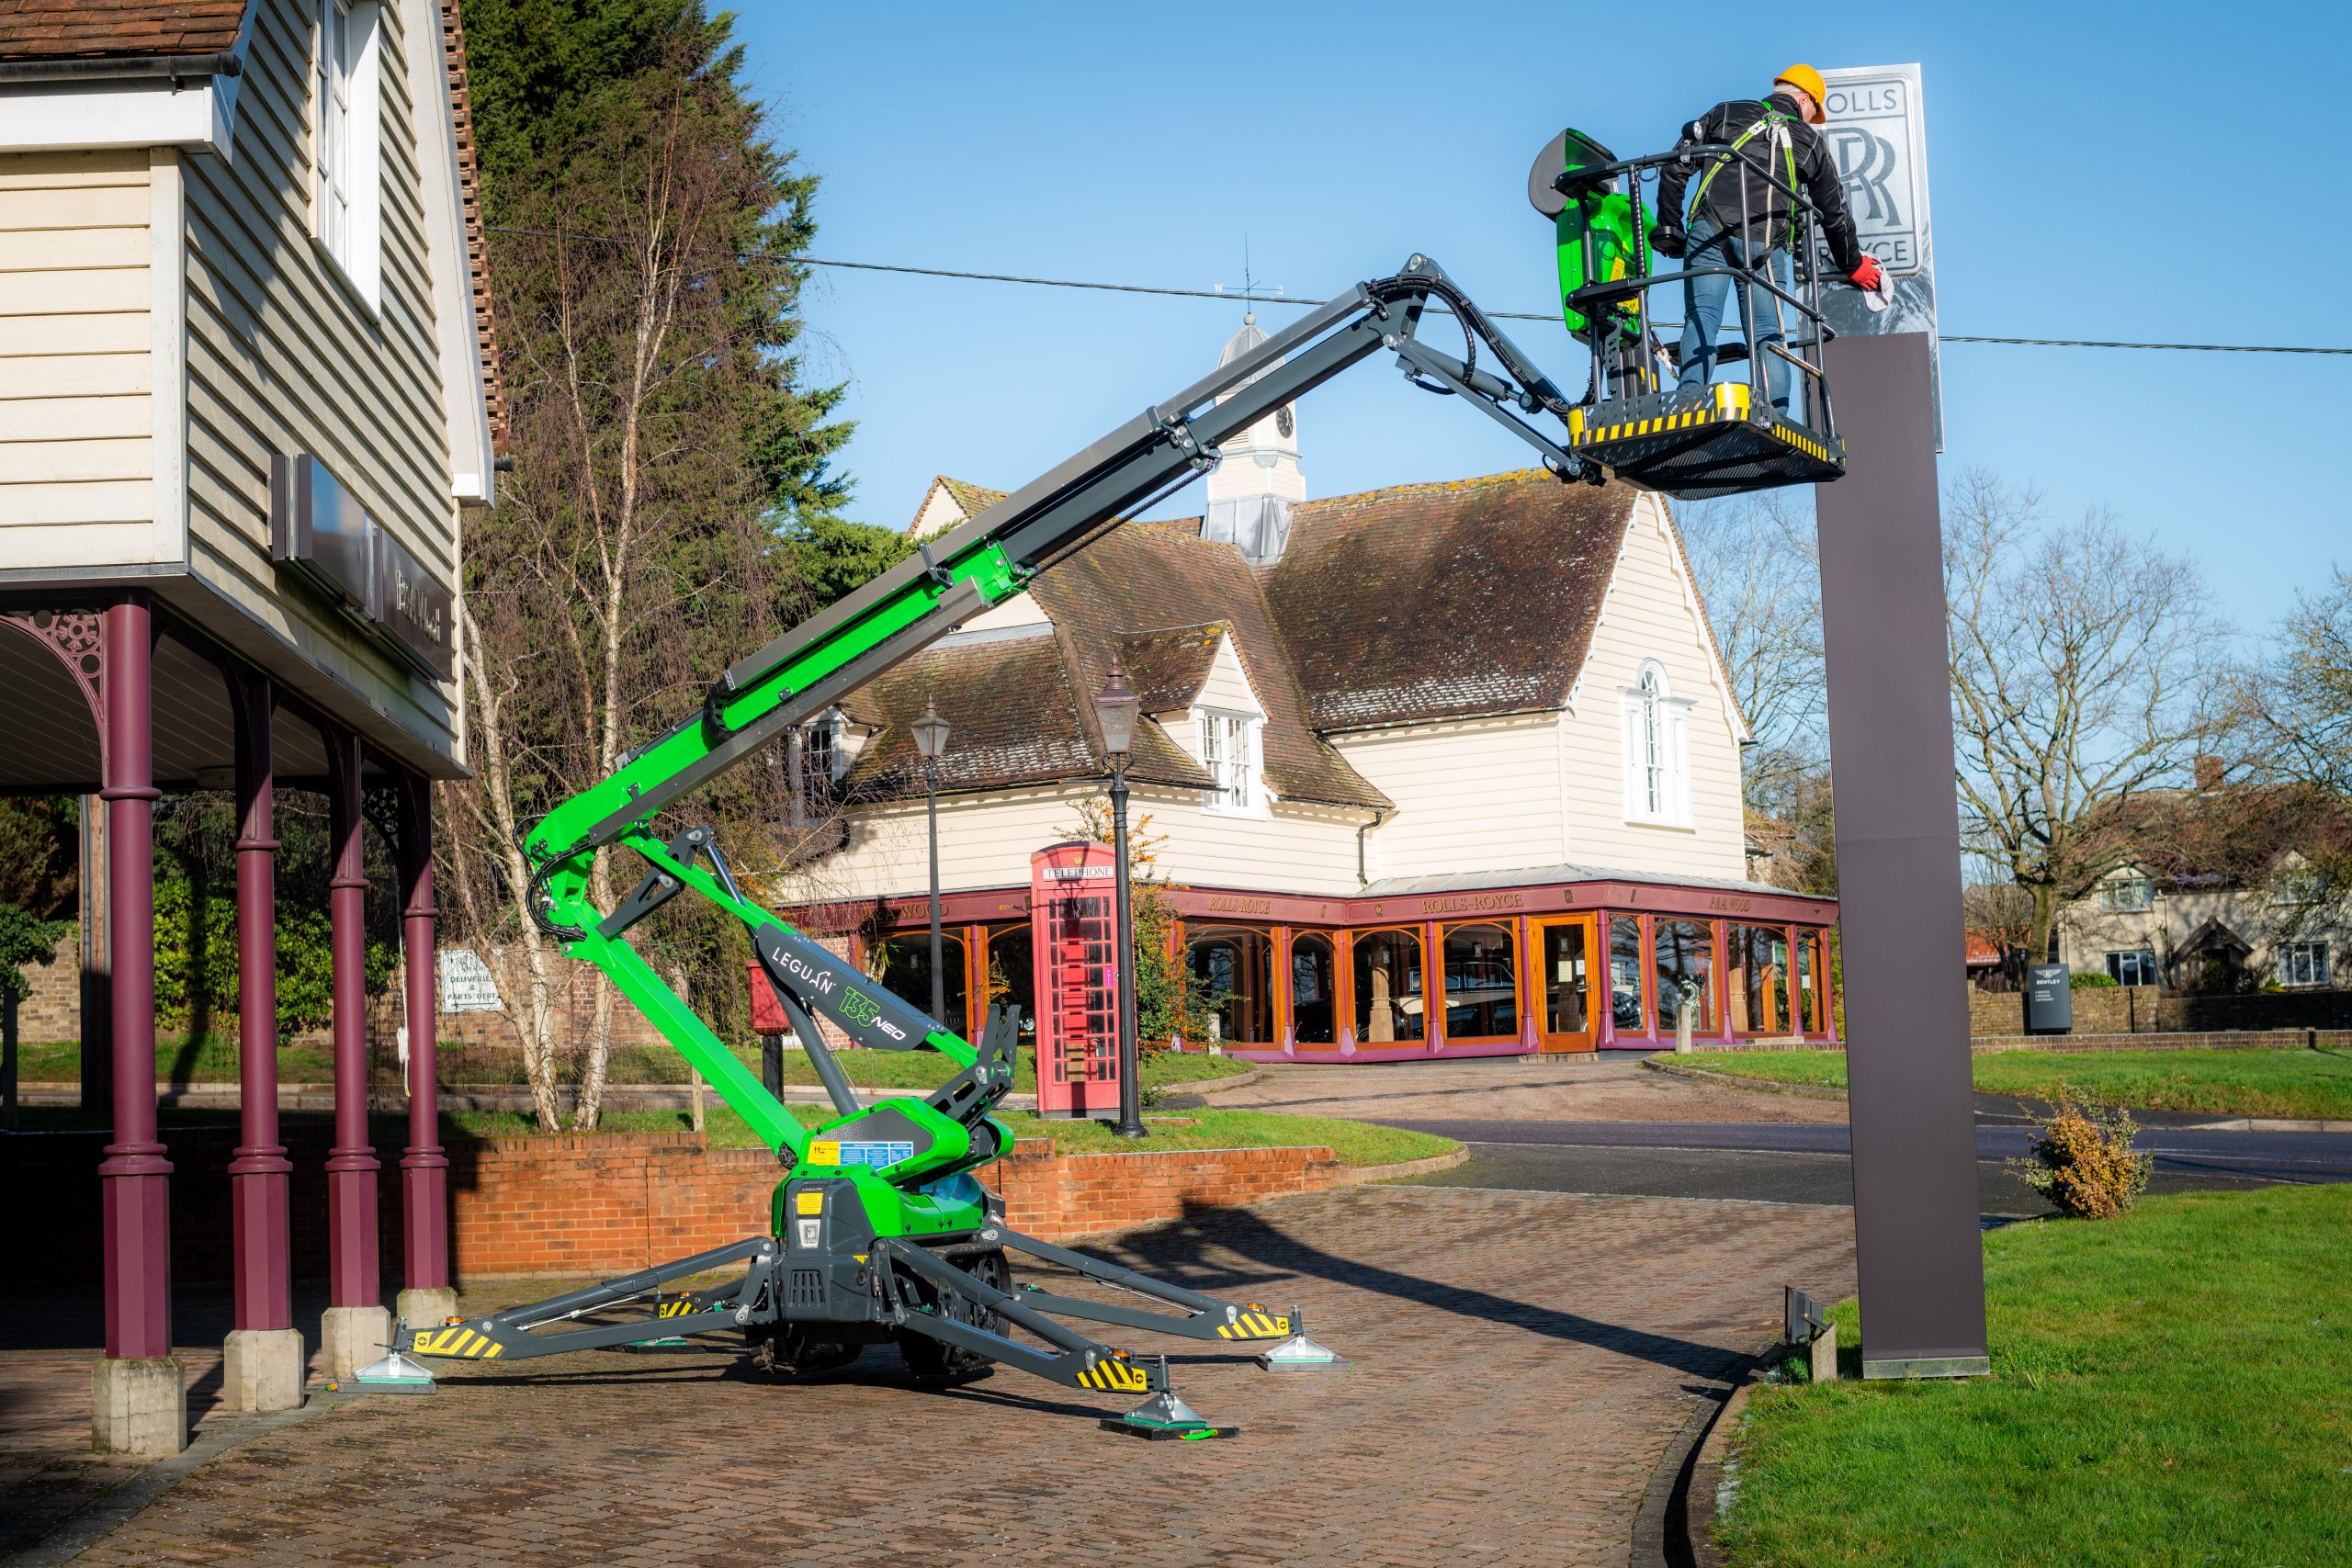 Reaching new heights with the new Leguan distributor in the UK